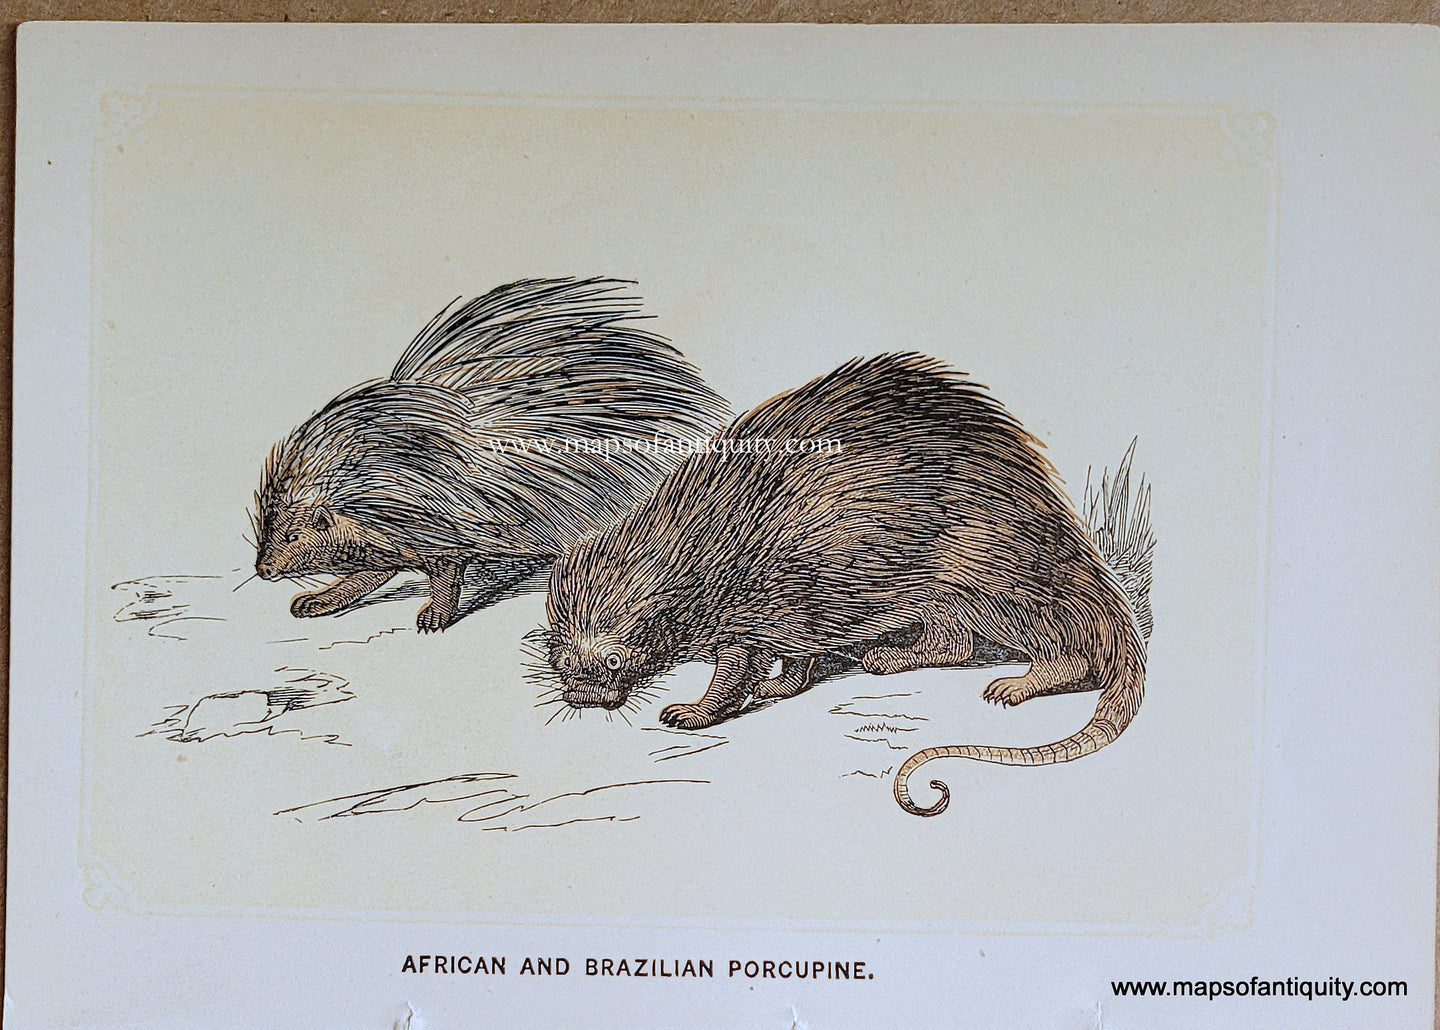 Genuine-Antique-Print-African-and-Brazilian-Porcupine-1850s-Tallis-Maps-Of-Antiquity